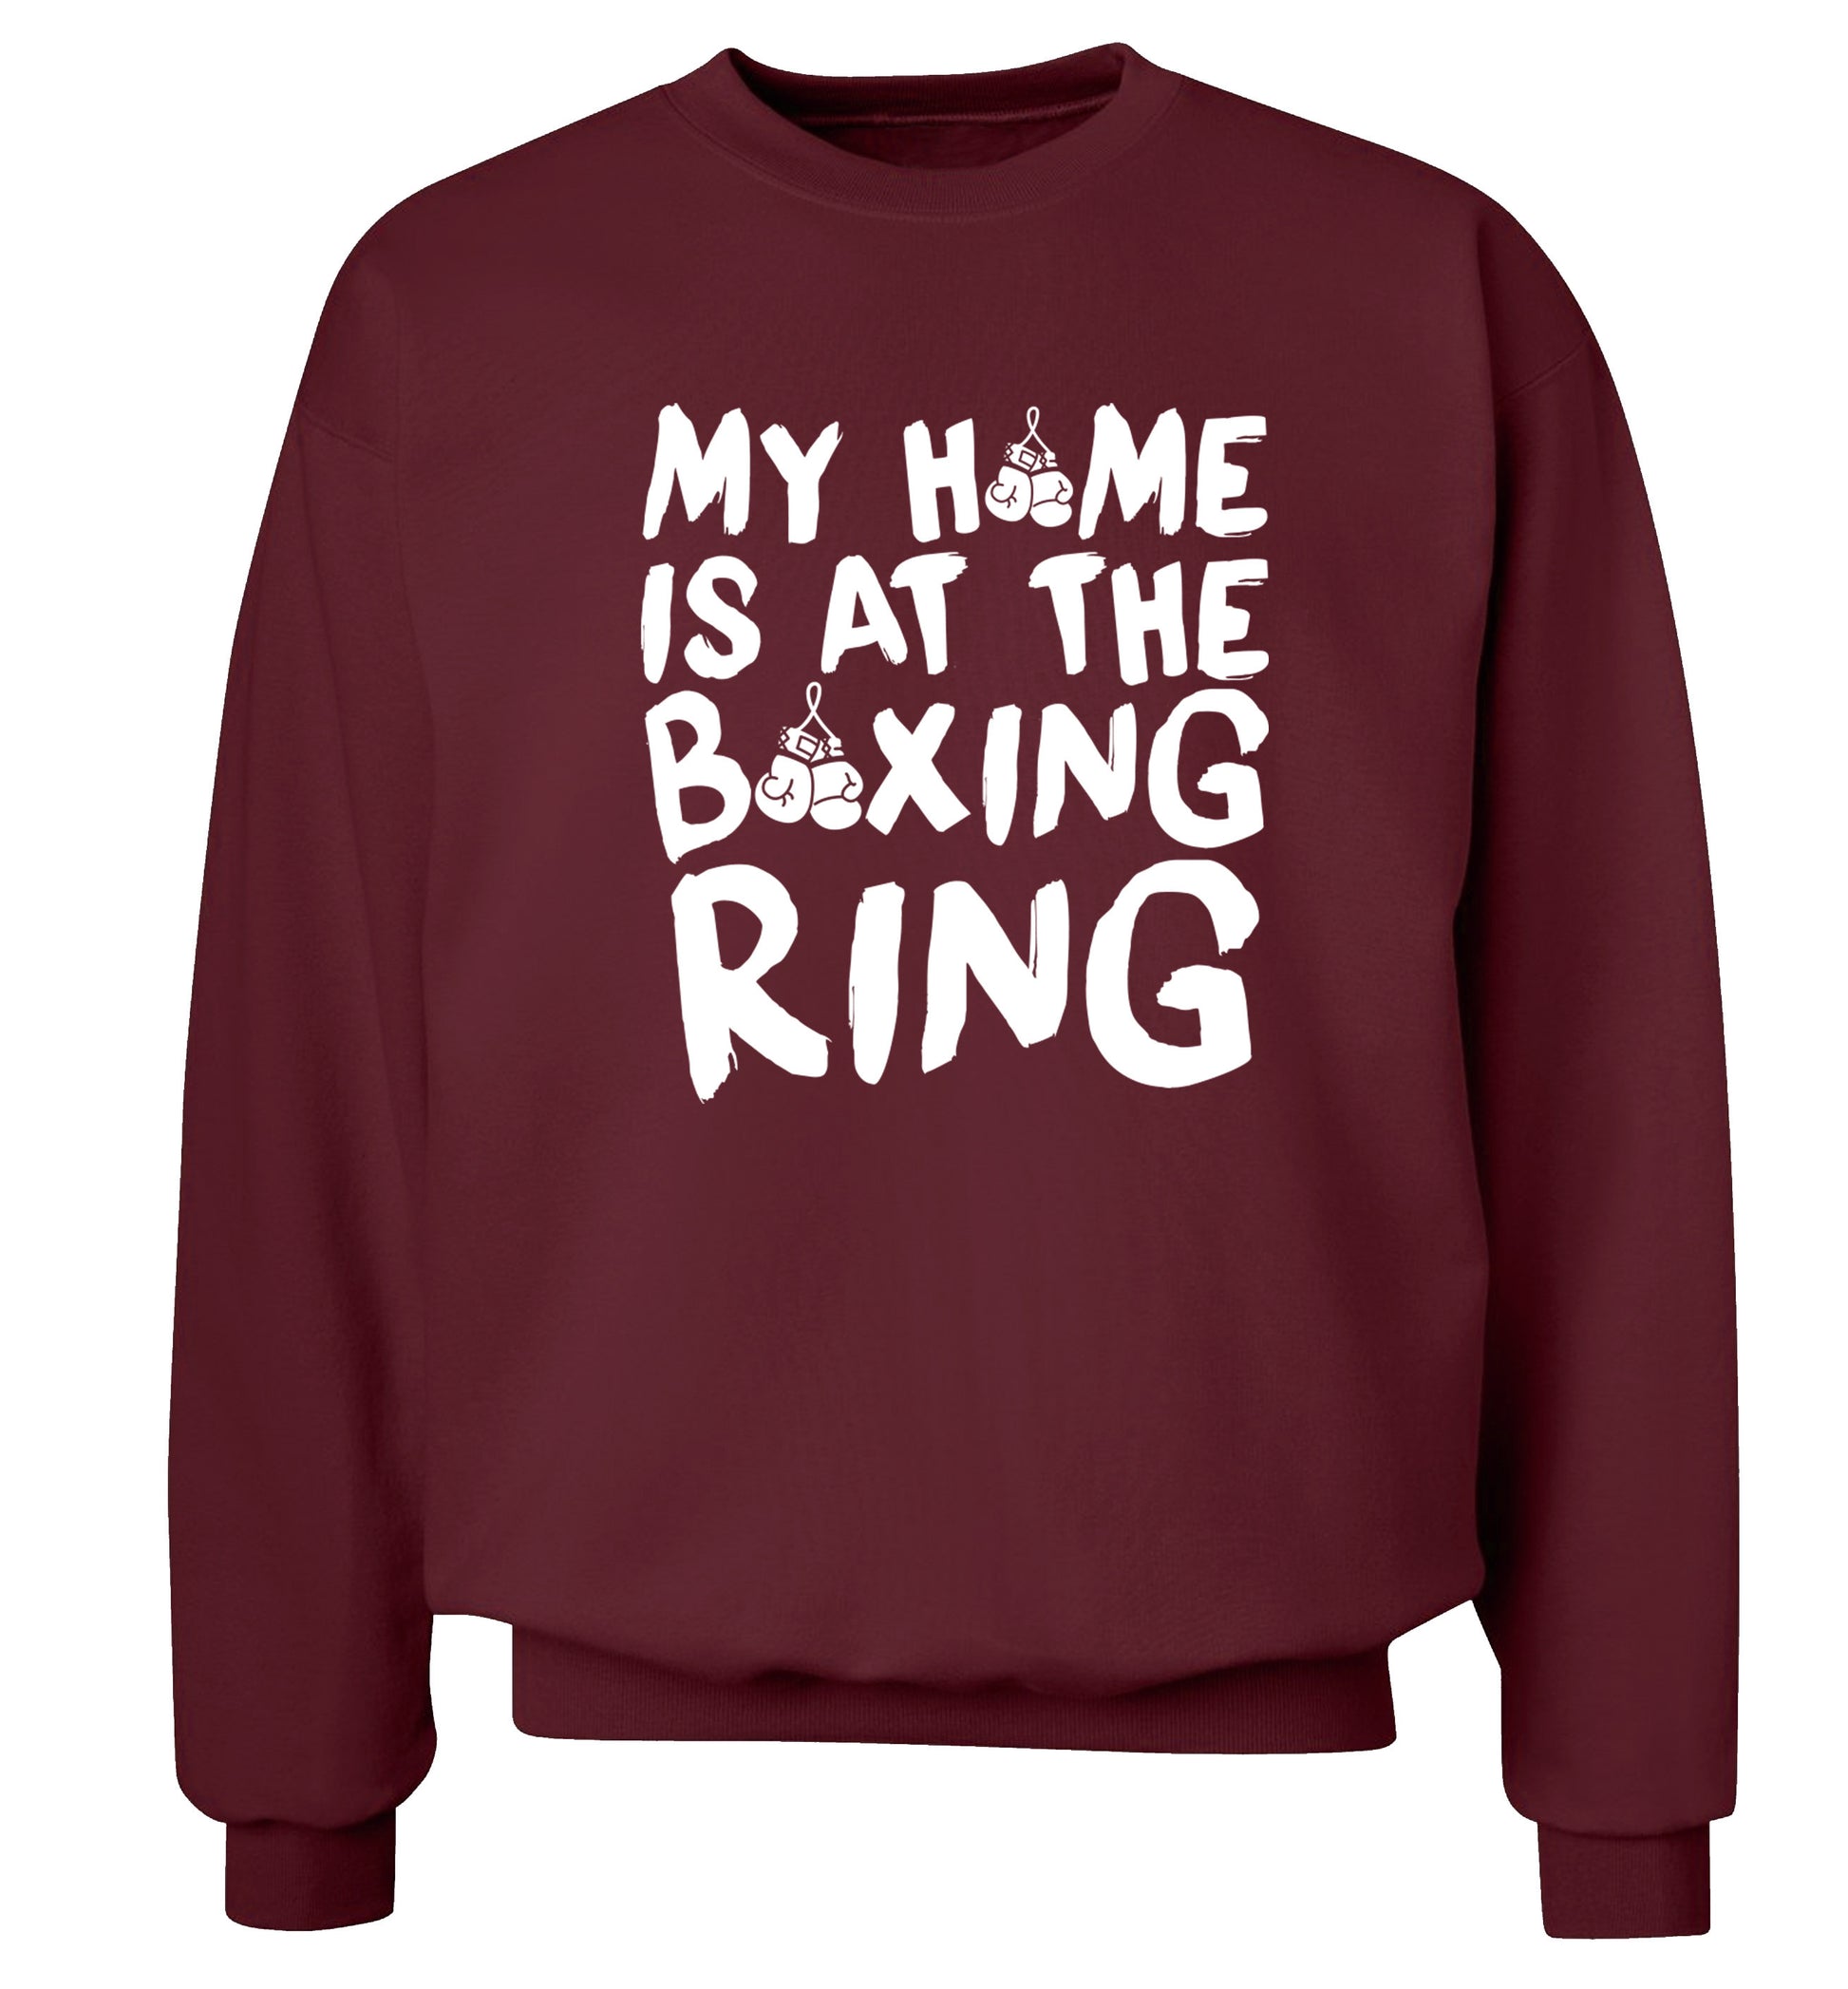 My home is at the boxing ring Adult's unisex maroon Sweater 2XL